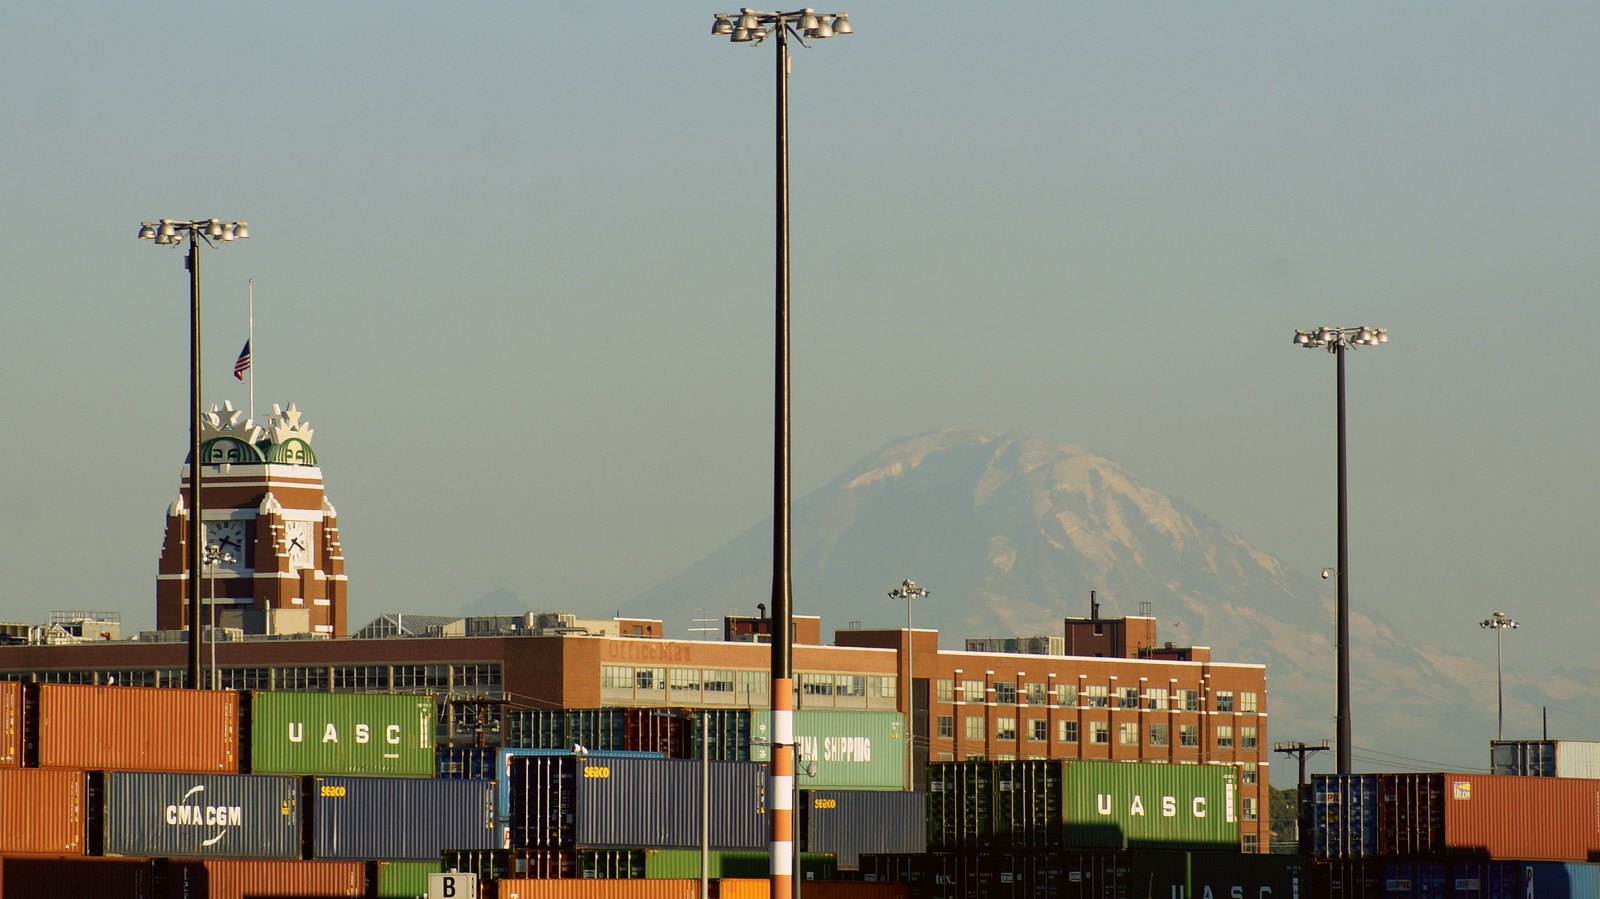 Starbucks Center behind the Port of Seattle with Mount Rainier Behind